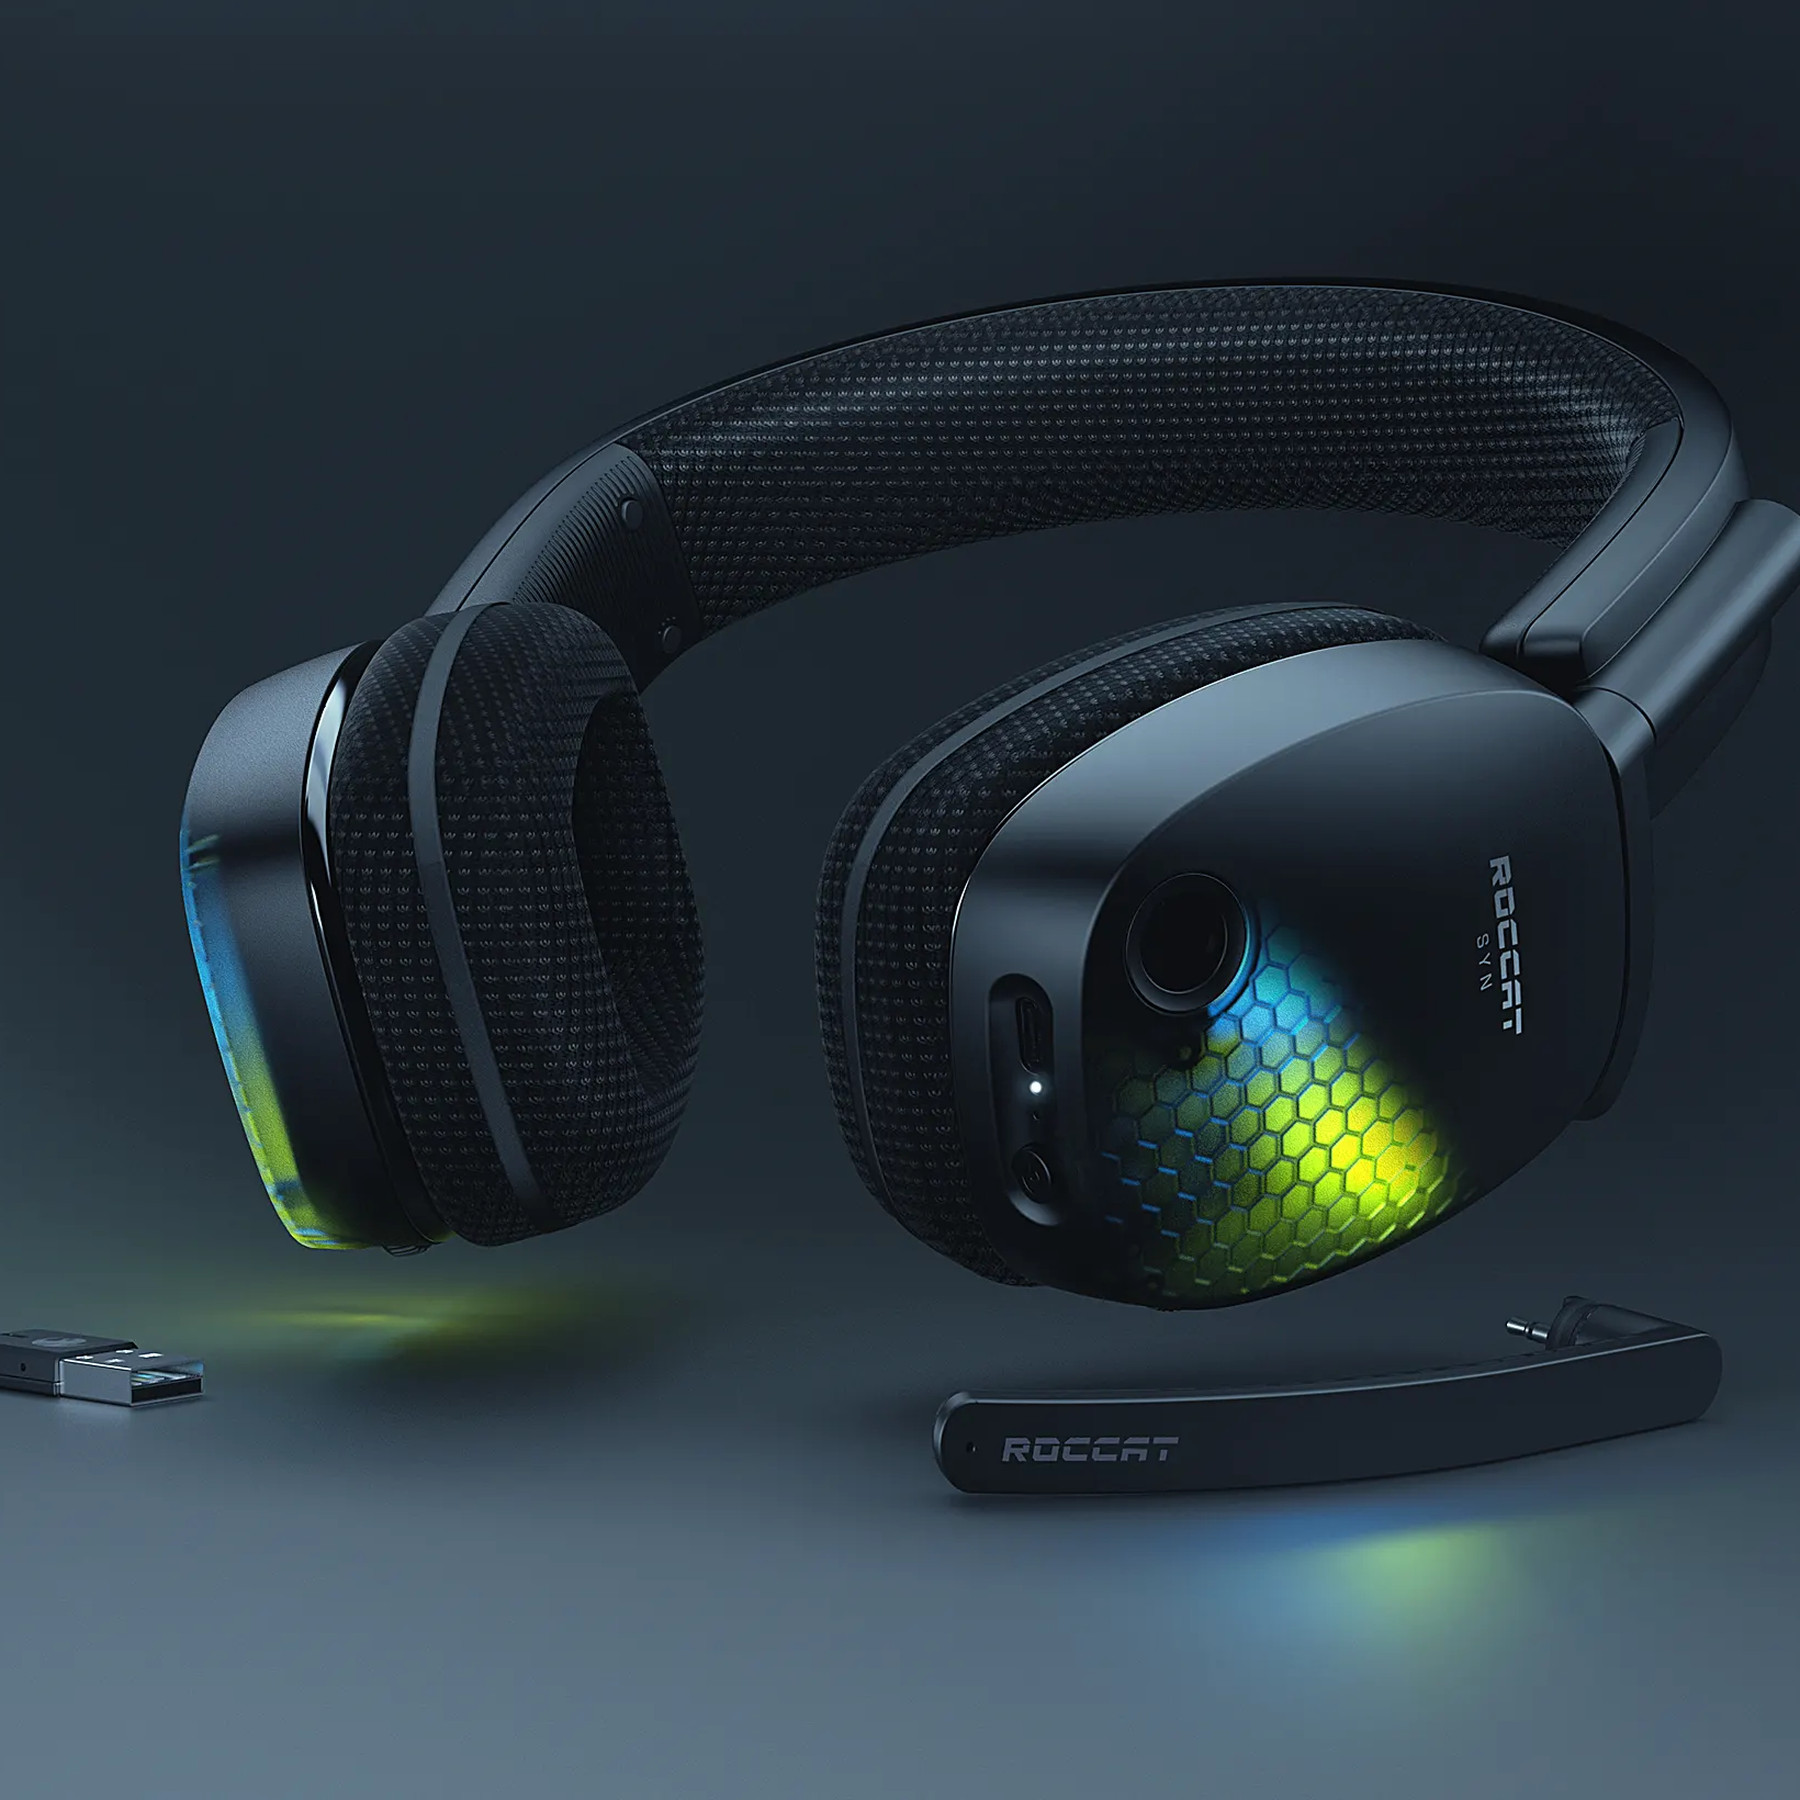 yderligere kamp couscous The best gaming headsets 2021 - Polygon